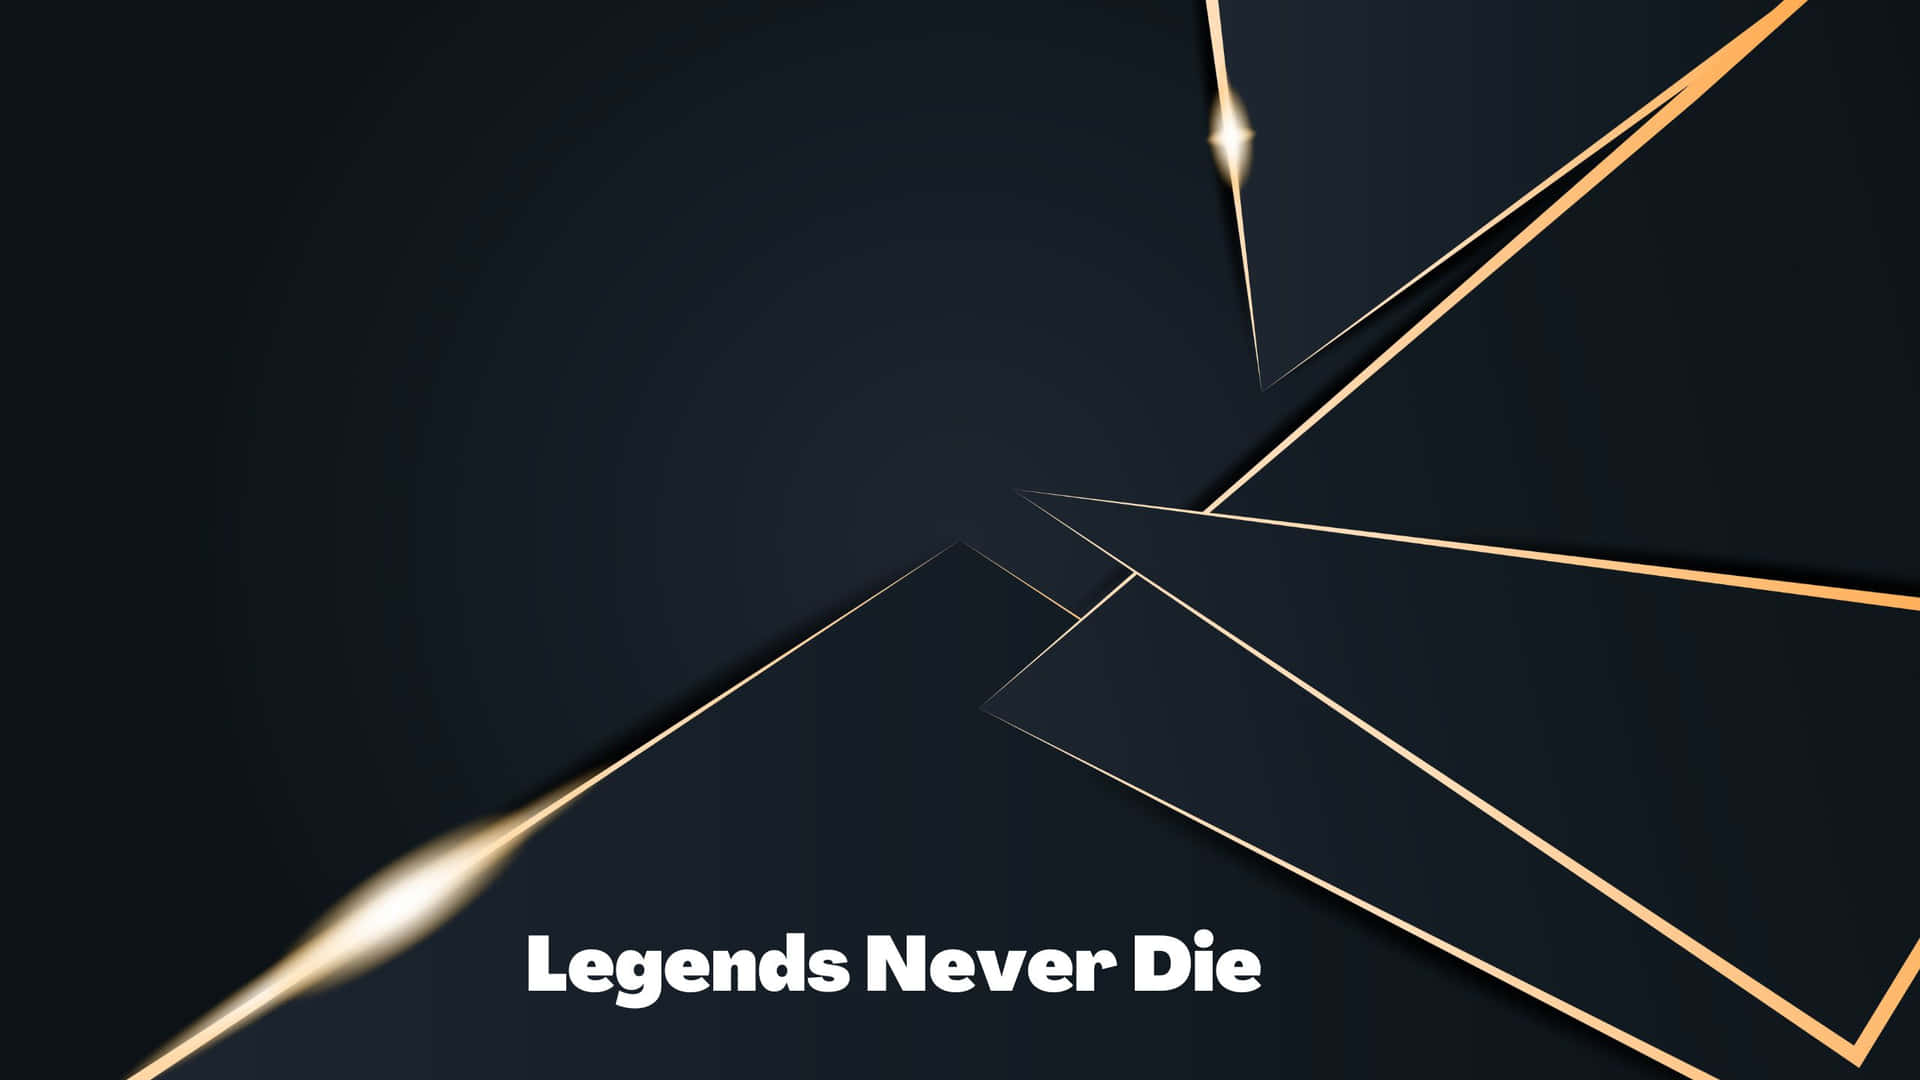 "Legends Never Die. They simply become part of our history." Wallpaper